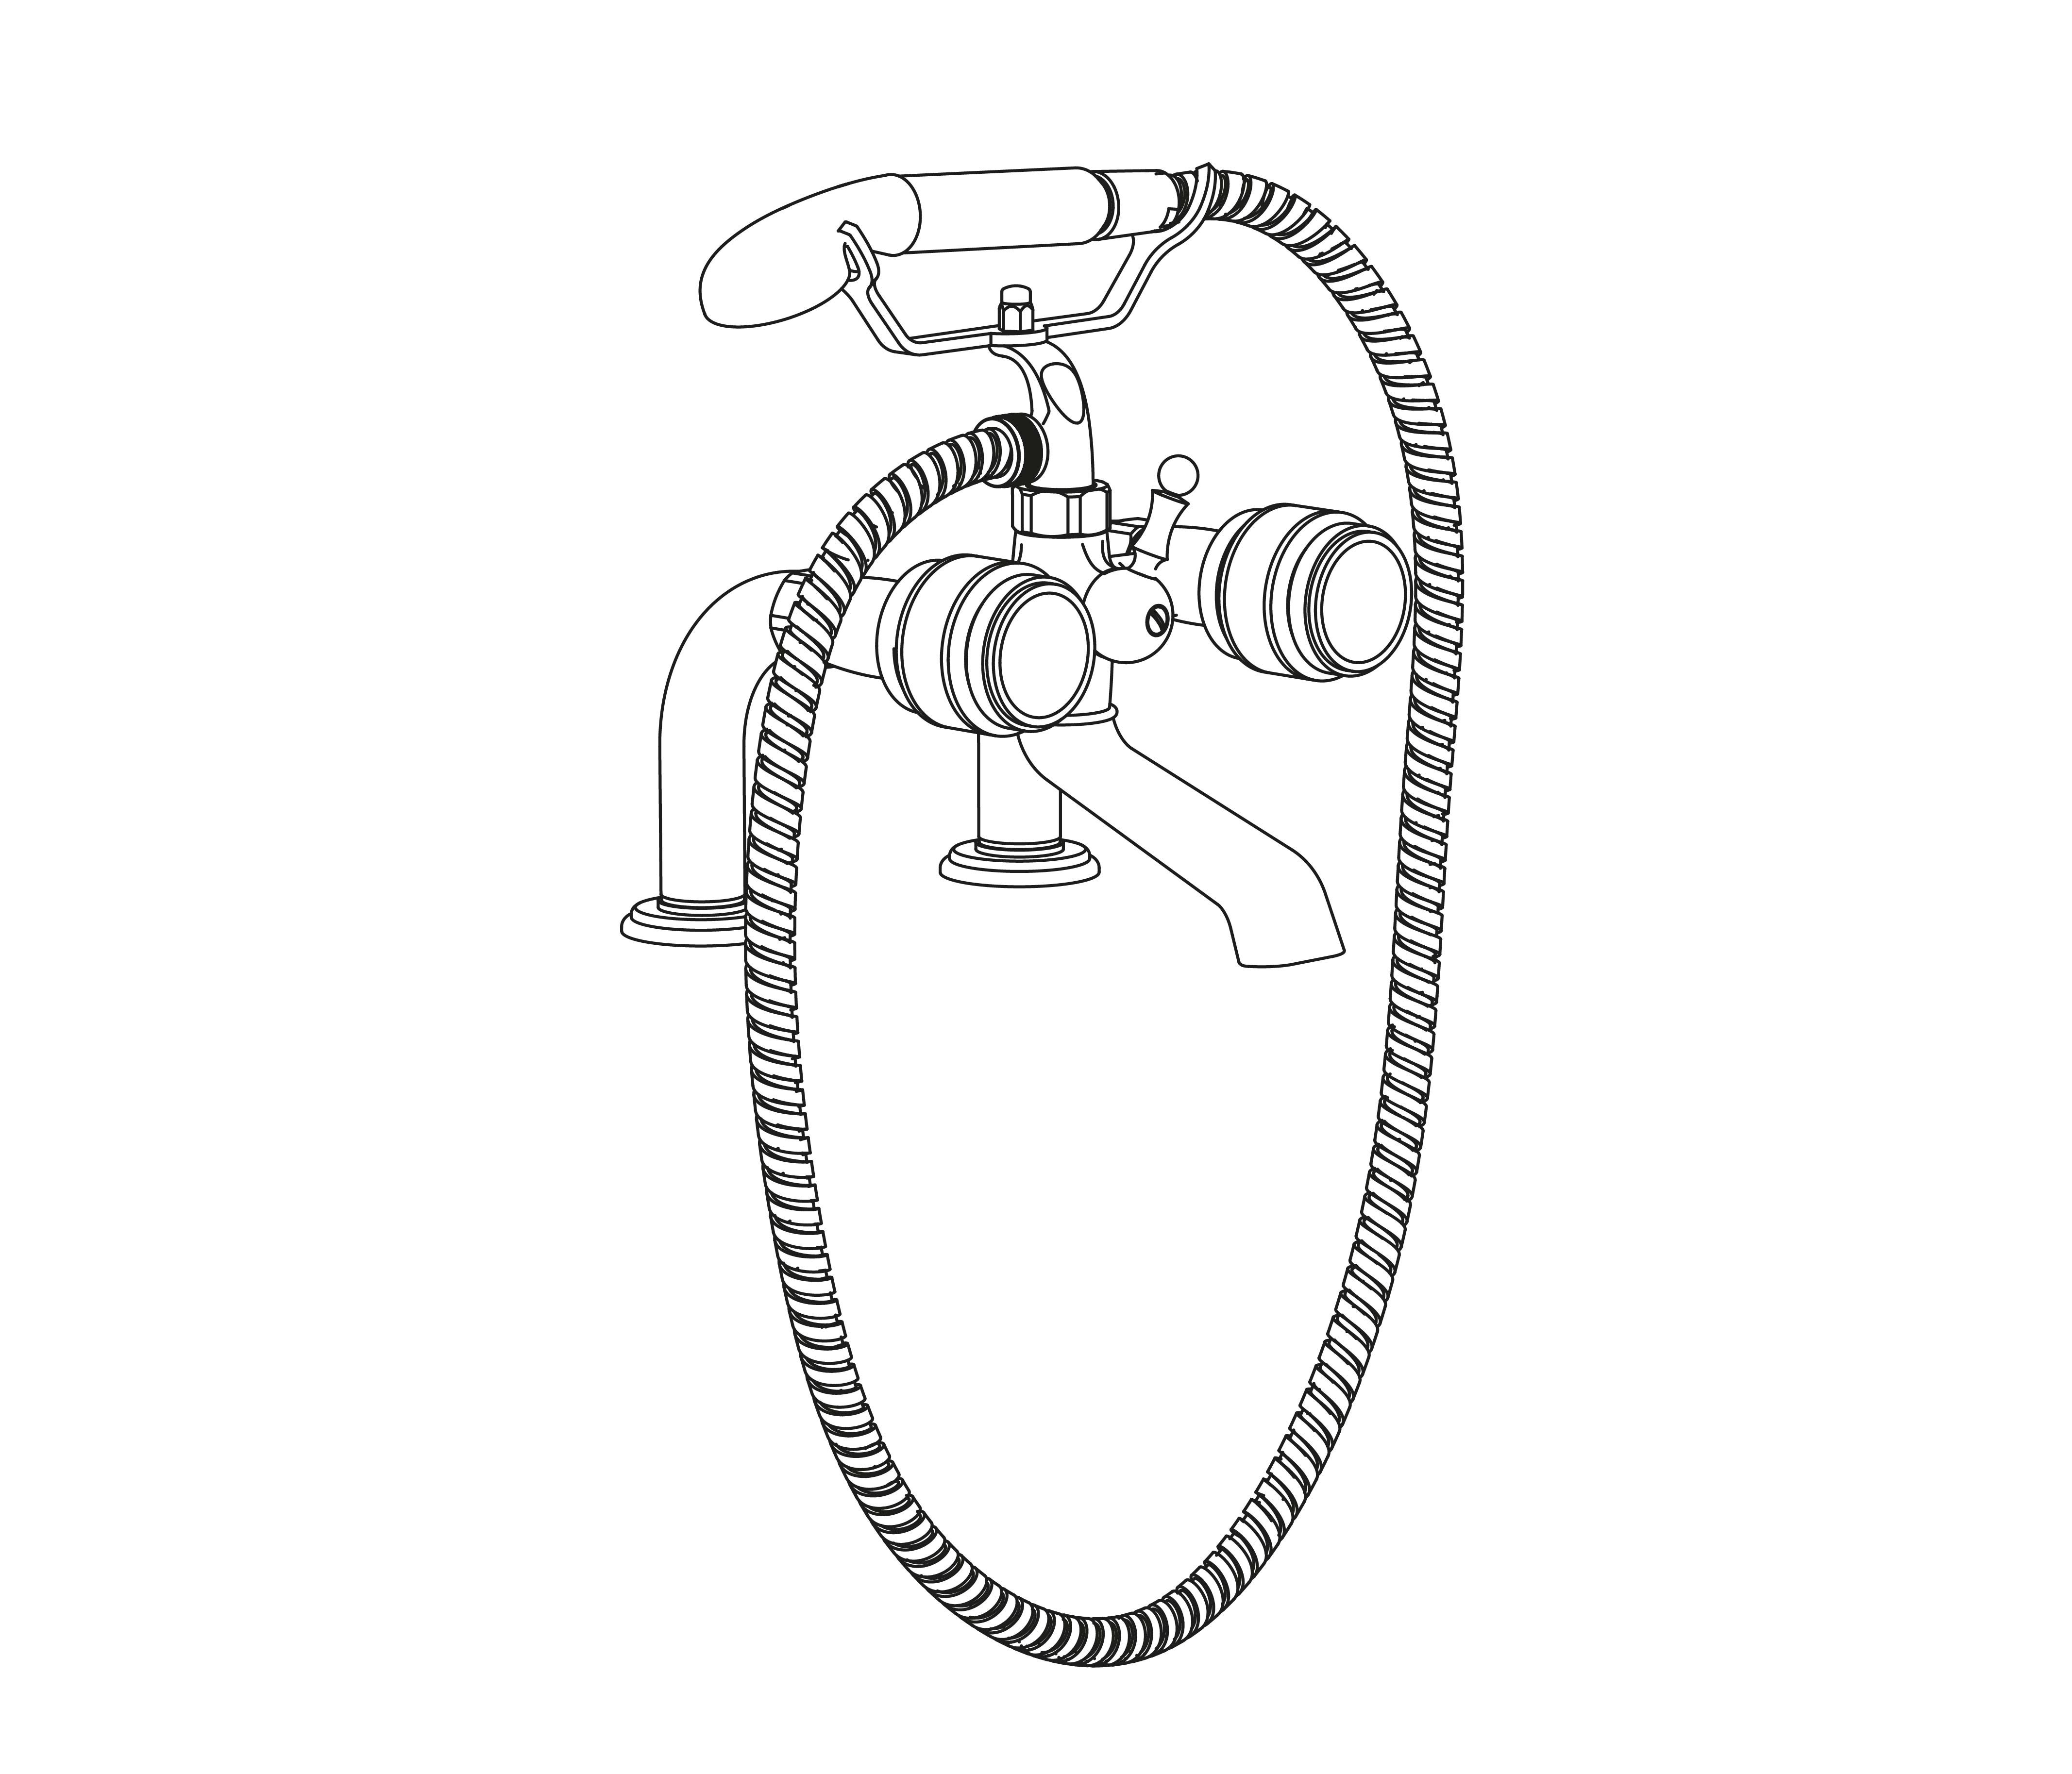 S89-3306 Rim mounted bath and shower mixer